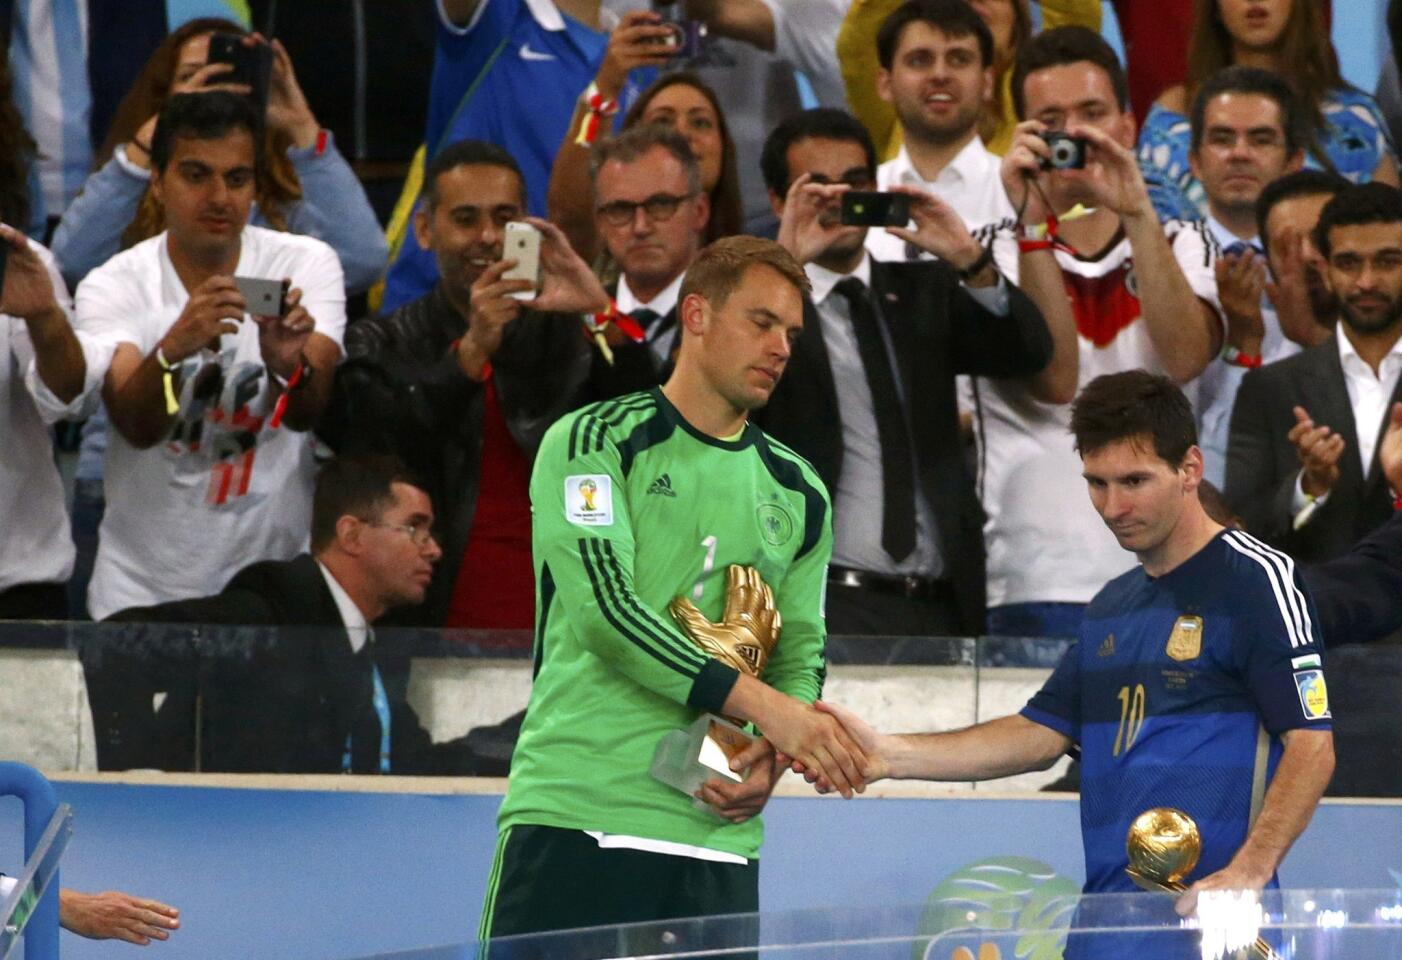 Germany's goalkeeper Manuel Neuer and Argentina's Lionel Messi shake hands after receiving awards after their 2014 World Cup final at the Maracana stadium